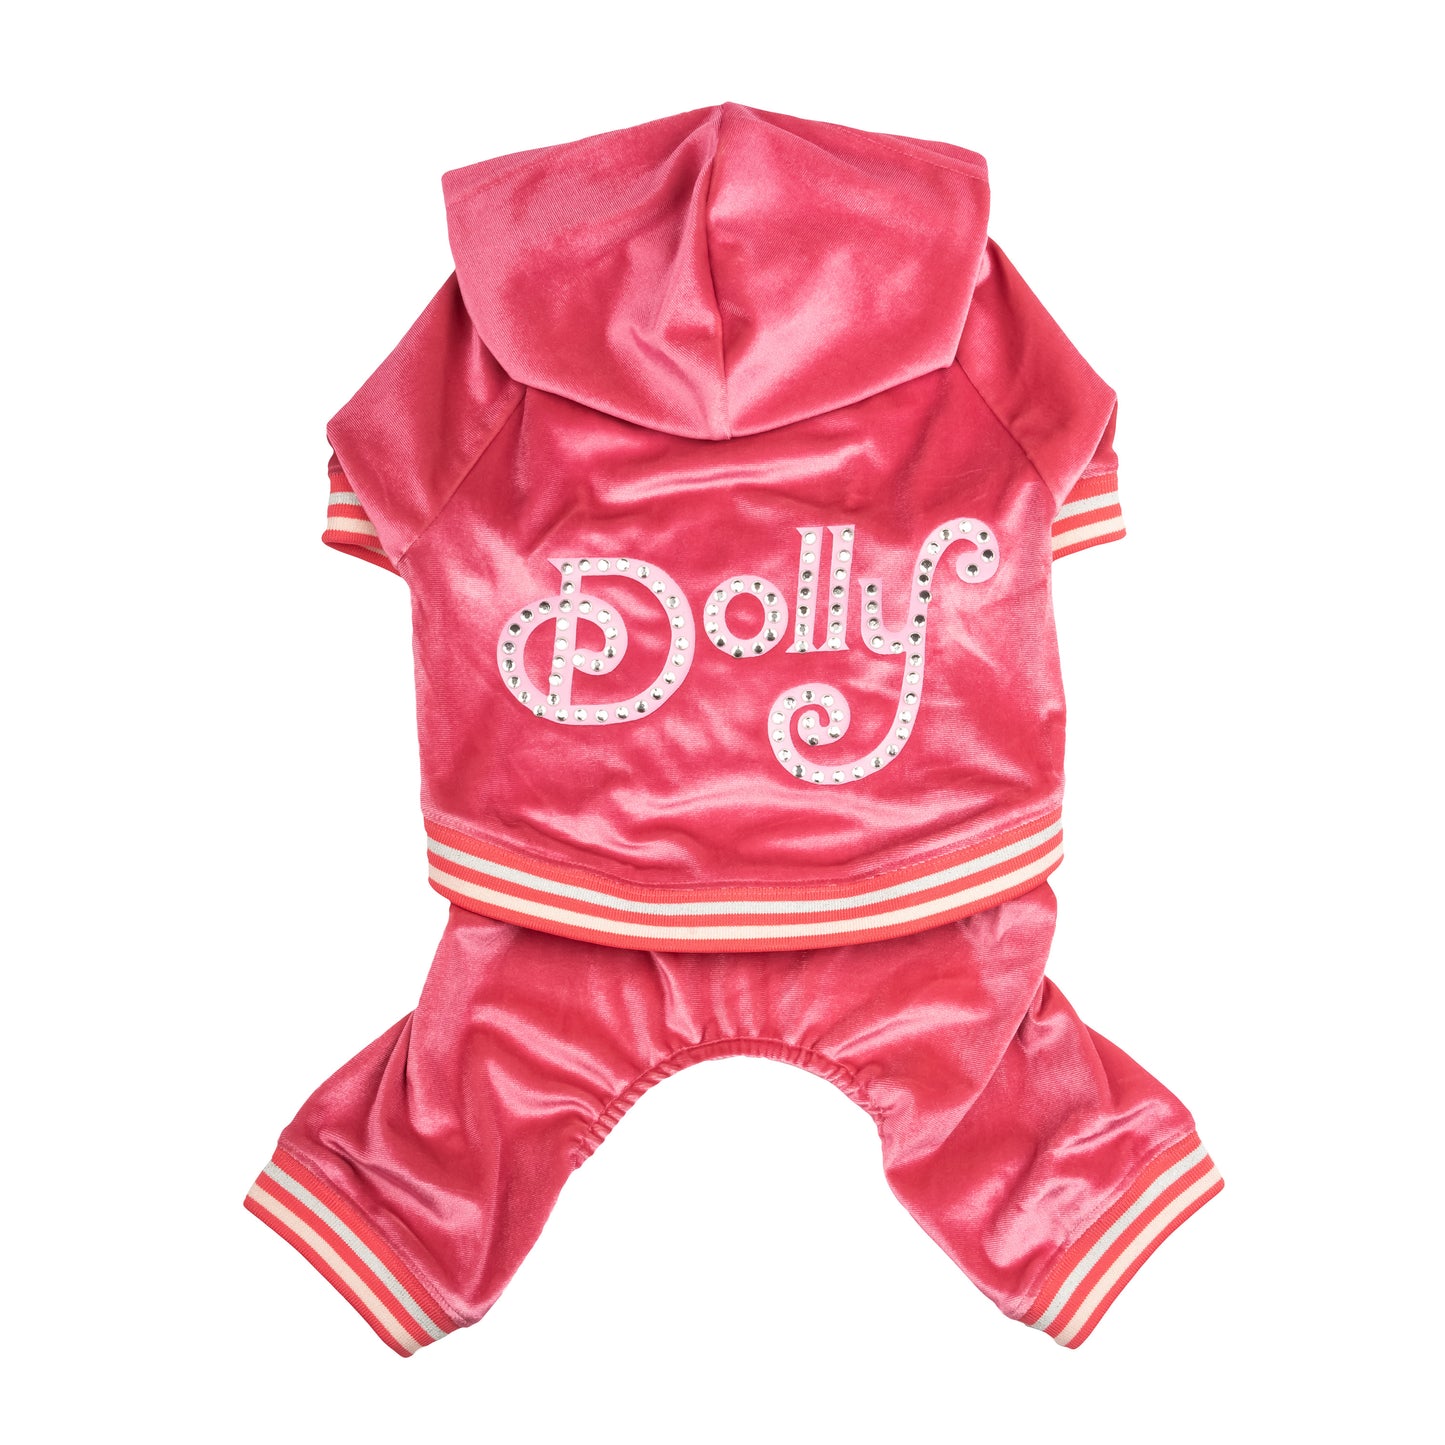 Dolly Rhinestone Pet Track Suit - Pink